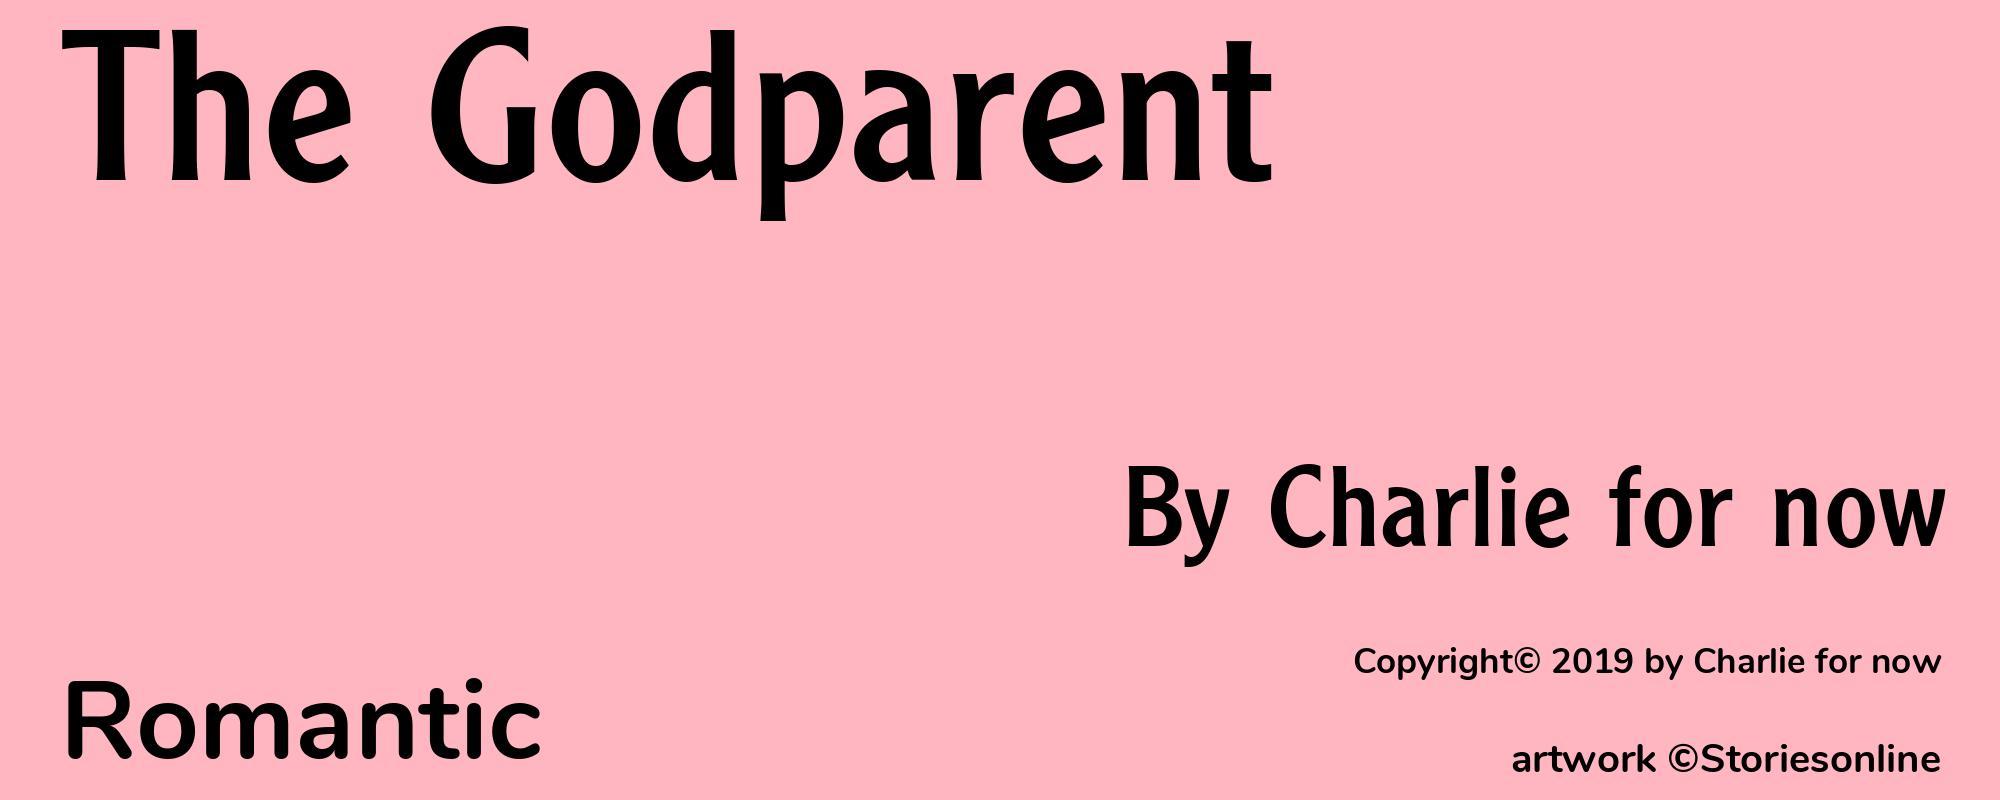 The Godparent - Cover